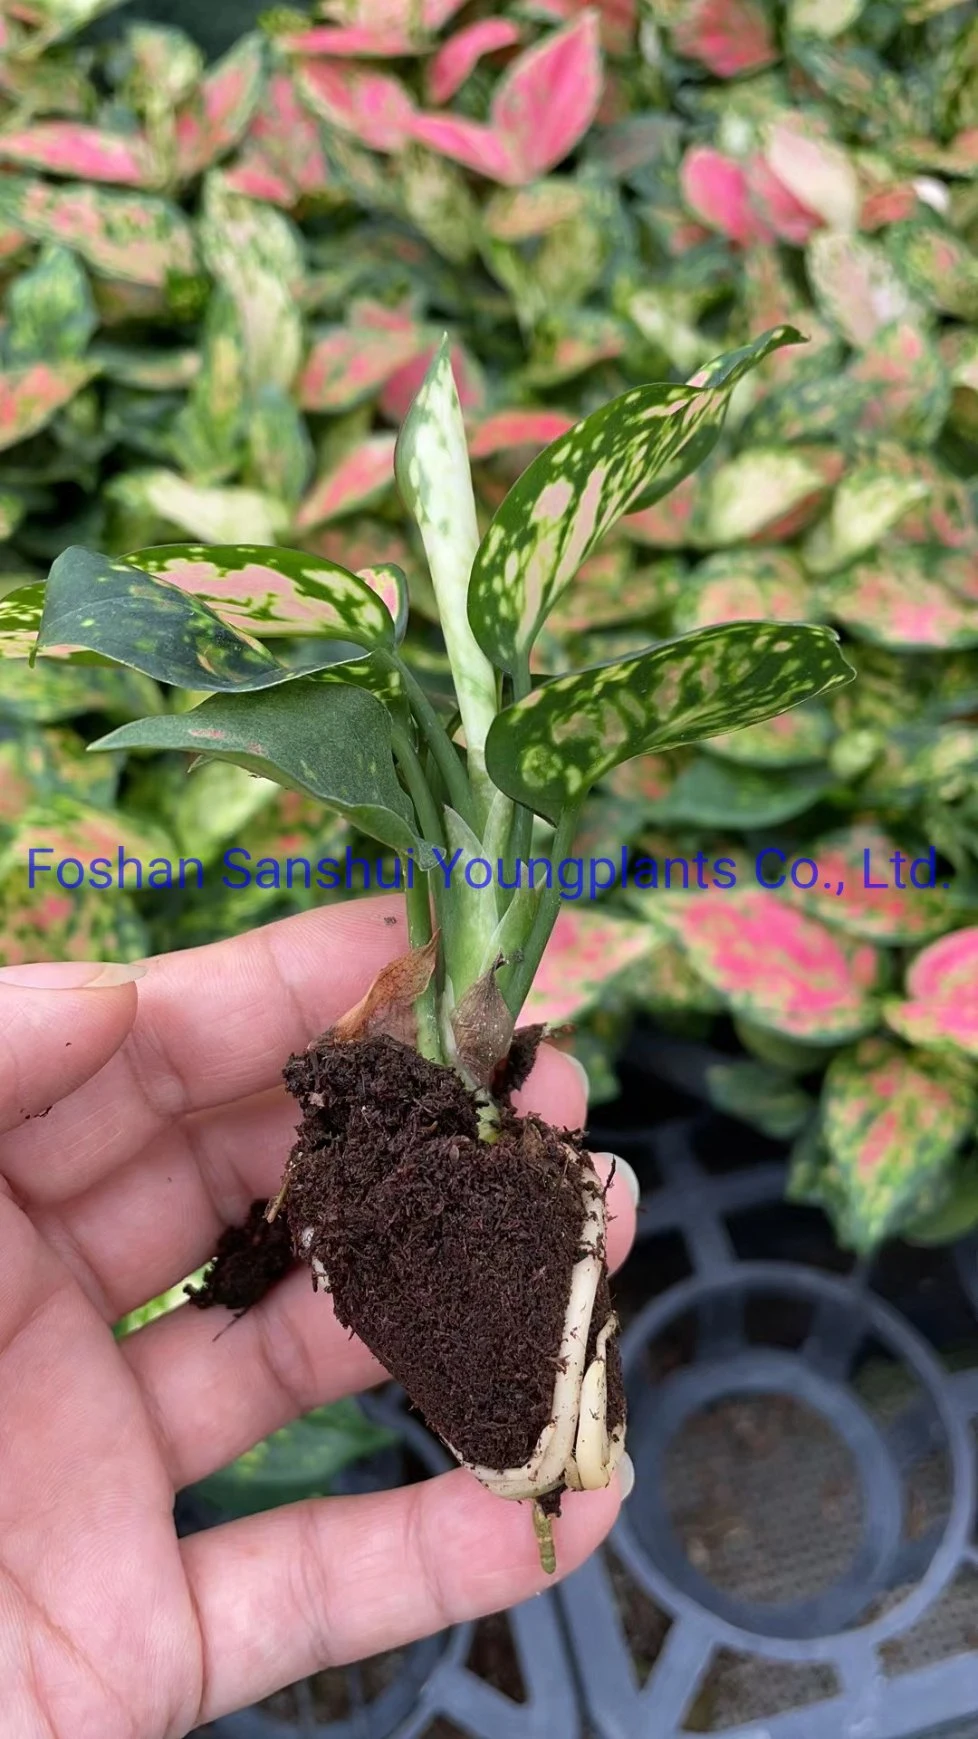 Bonsai Finished Mature Natural Live Plant From Tissue Culture Seedlings